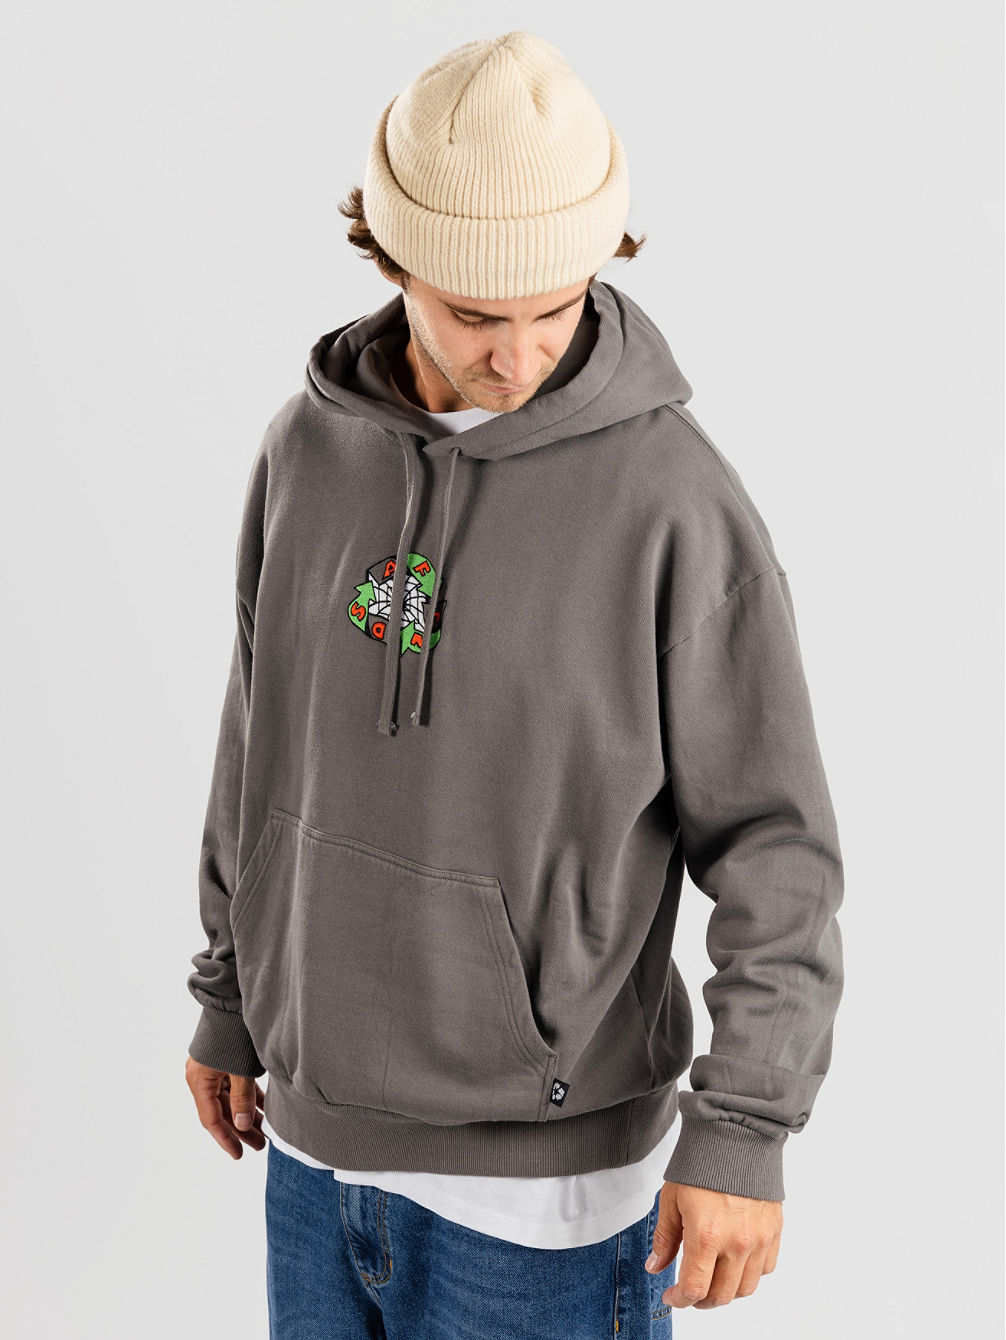 Warper - Recycled Pull On Sudadera con Capucha